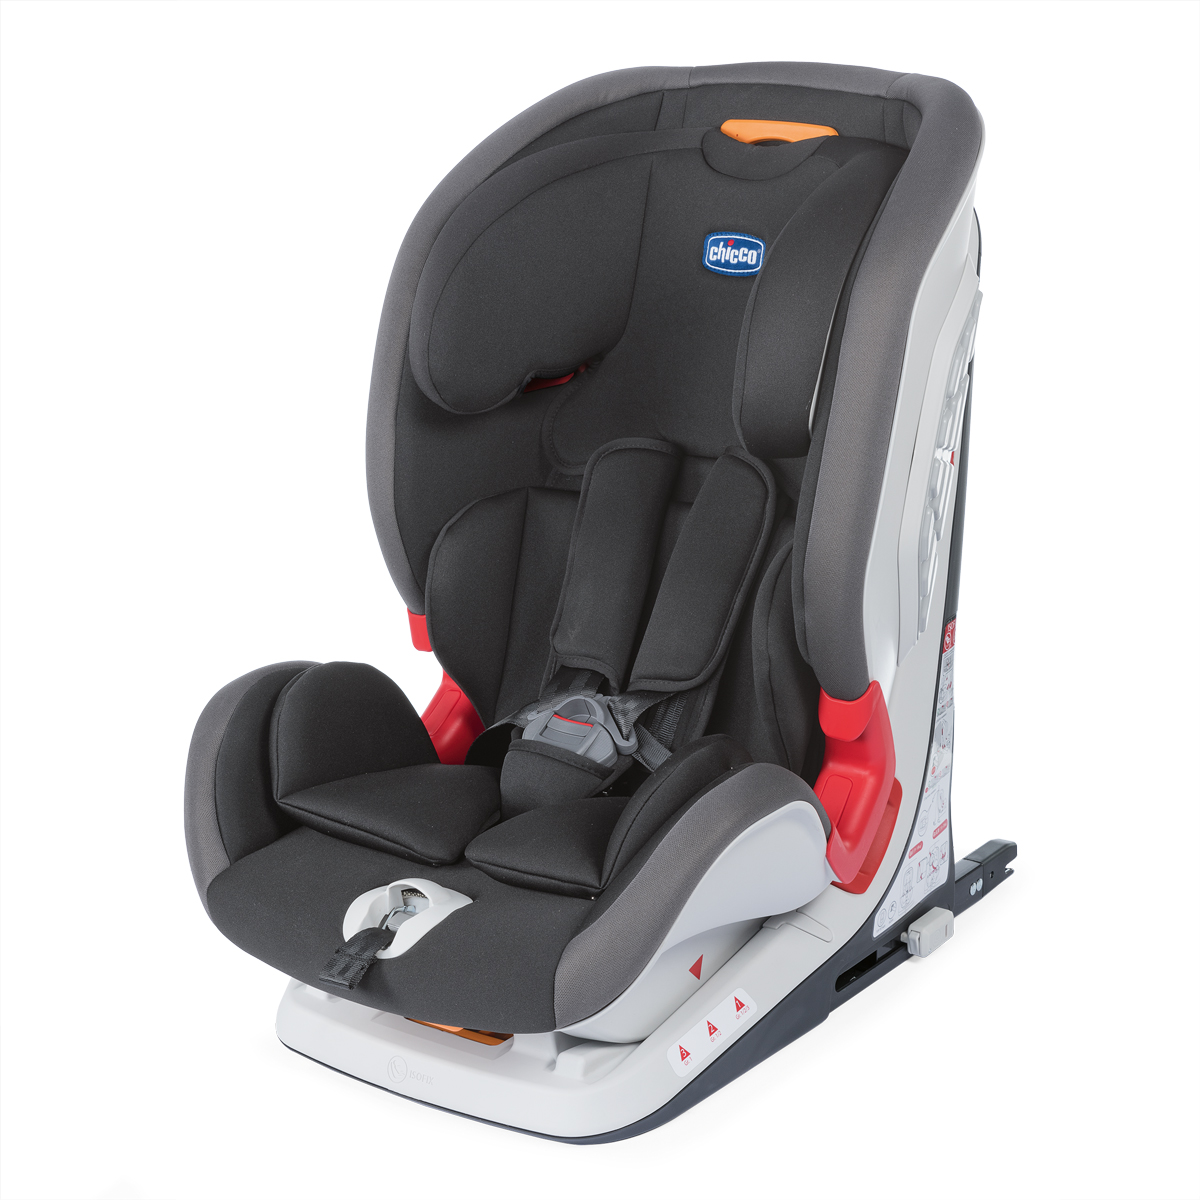 to understand domestic catch a cold Scaun Auto Copii Chicco Youniverse Isofix, Jet Black, 12luni+ - ForBaby.ro